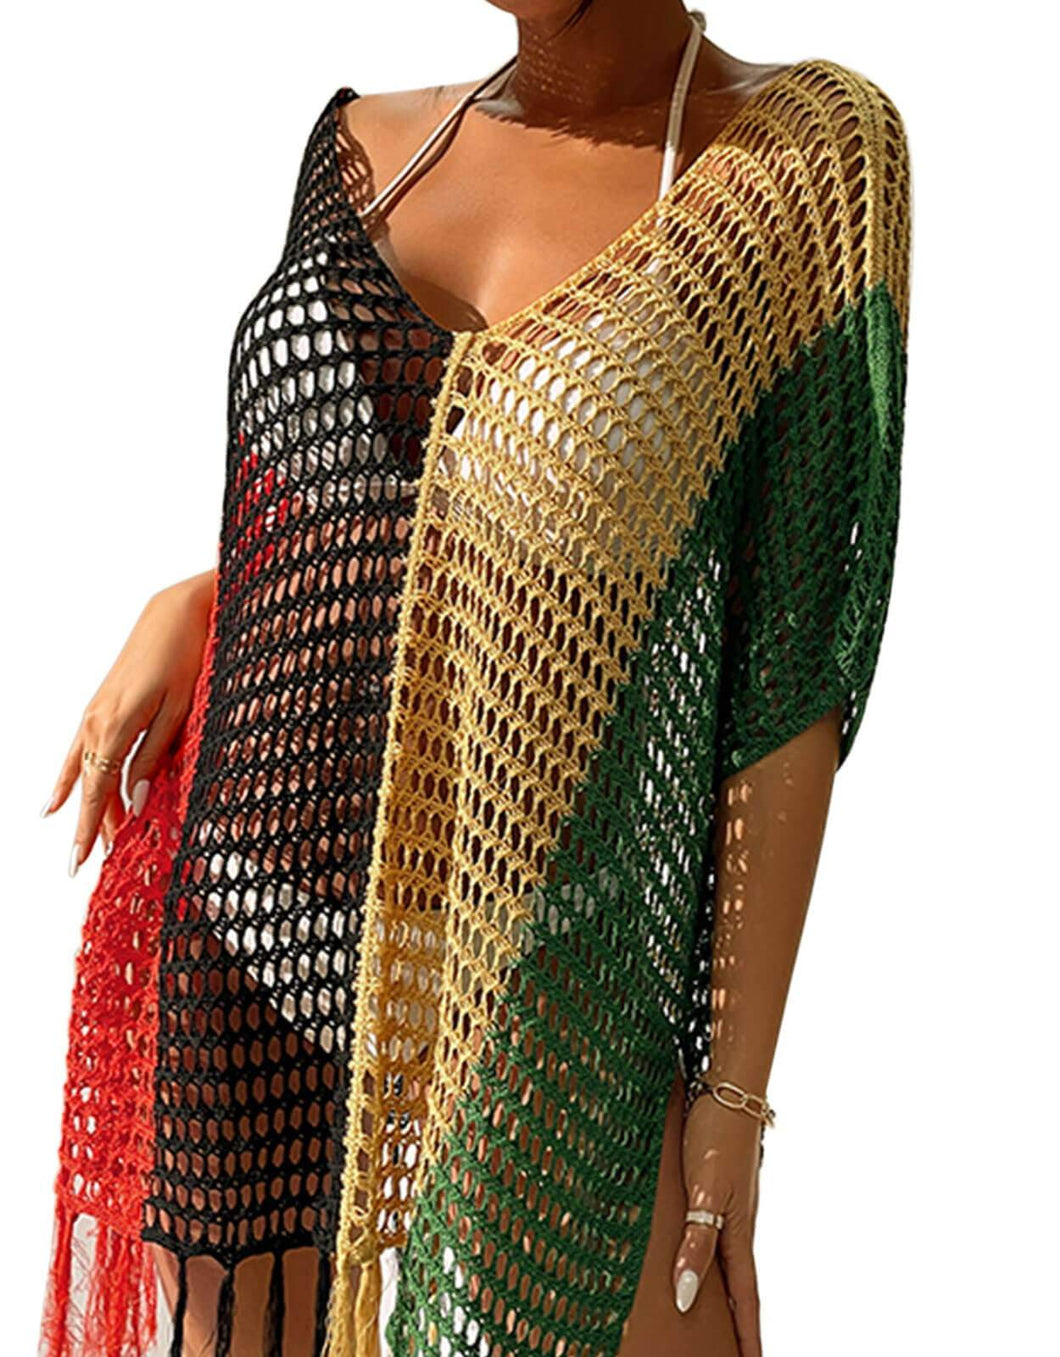 See through Crochet Bathing Suit Cover Ups